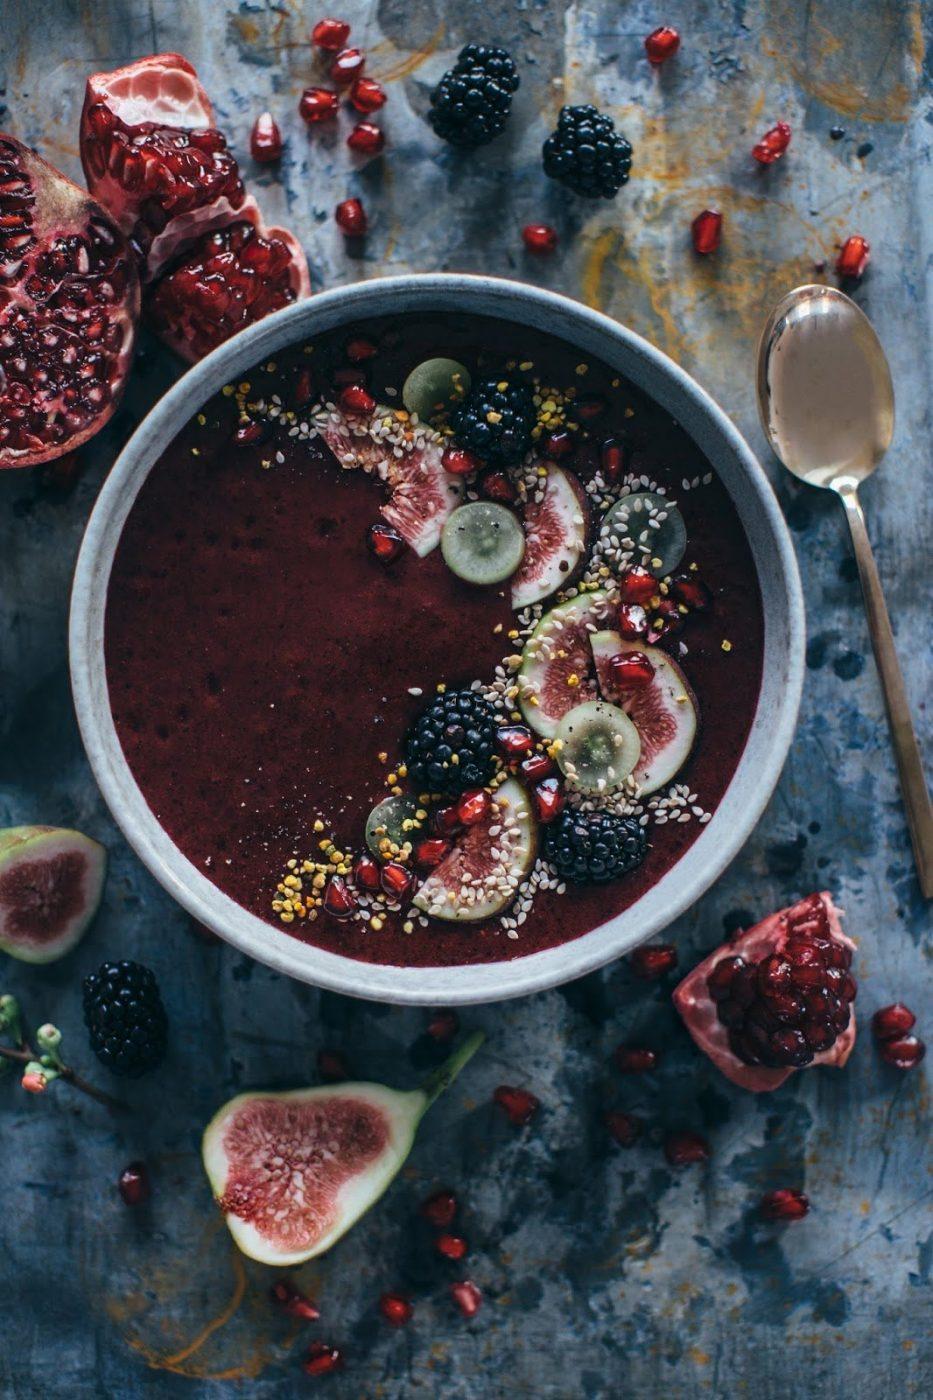 Image for Smoothie Breakfast Bowl with Pommegrante Juice and the Pommegrante-Series from Weleda